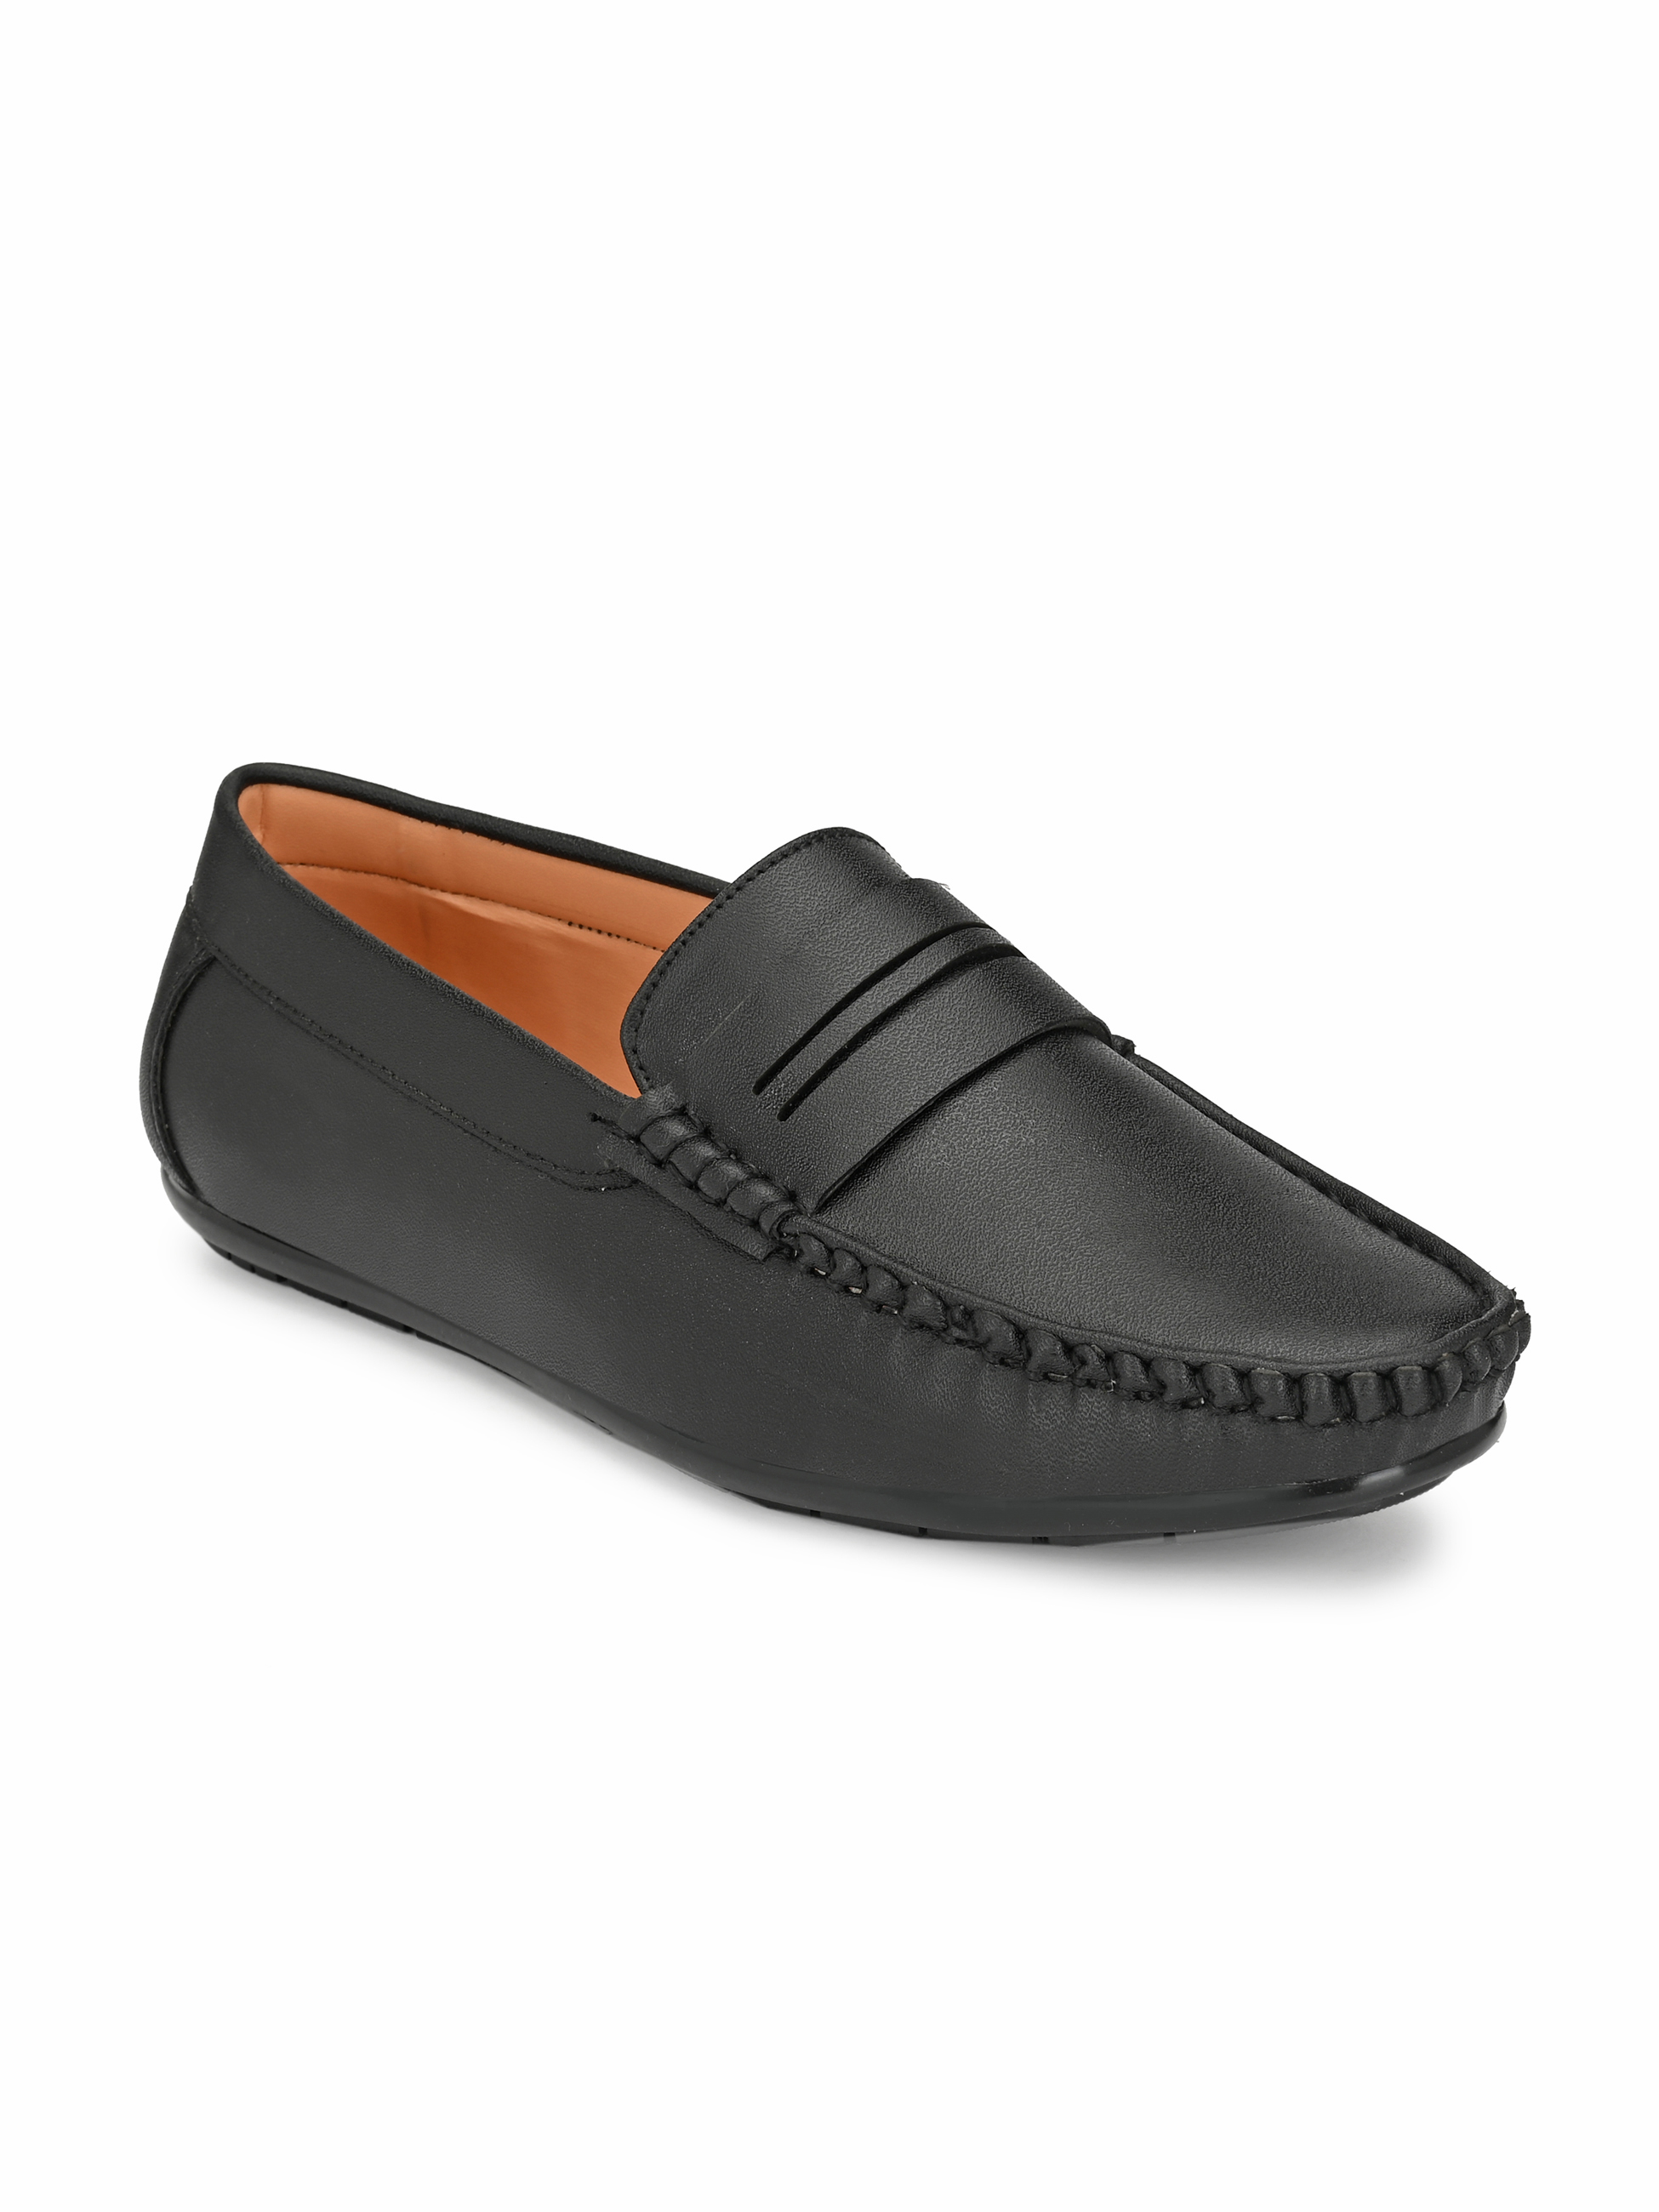 Buy Walkstyle by EL Paso Mens Black Slip On Loafer Casual Shoes Online ...